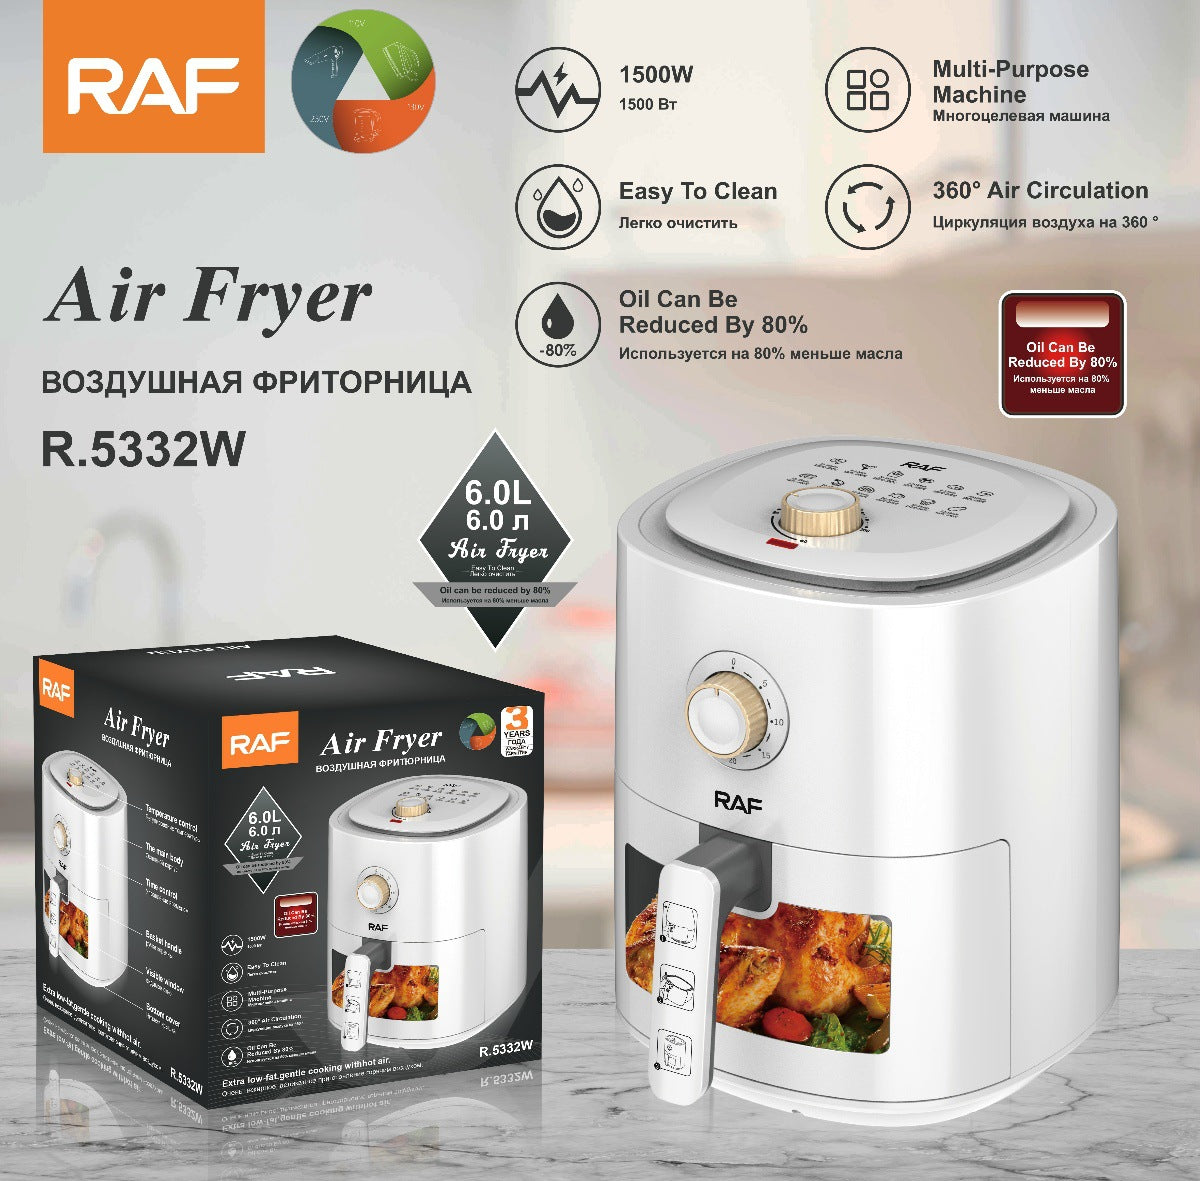 Air Fryer Household Multifunctional Oven 4L Large Capacity Automatic Electric Fryer